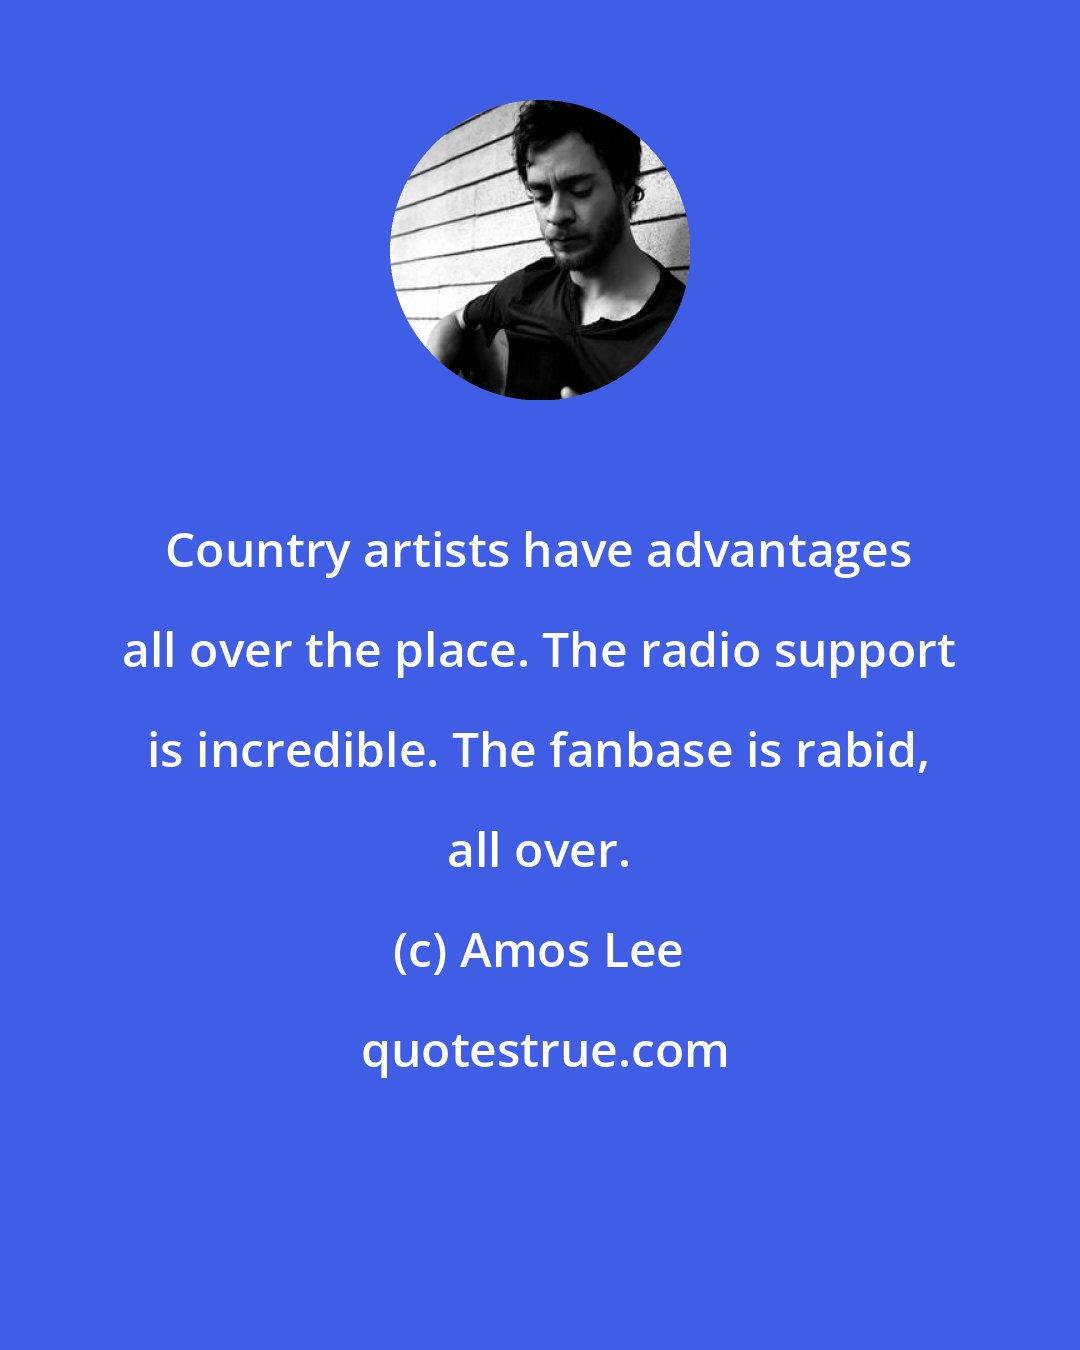 Amos Lee: Country artists have advantages all over the place. The radio support is incredible. The fanbase is rabid, all over.